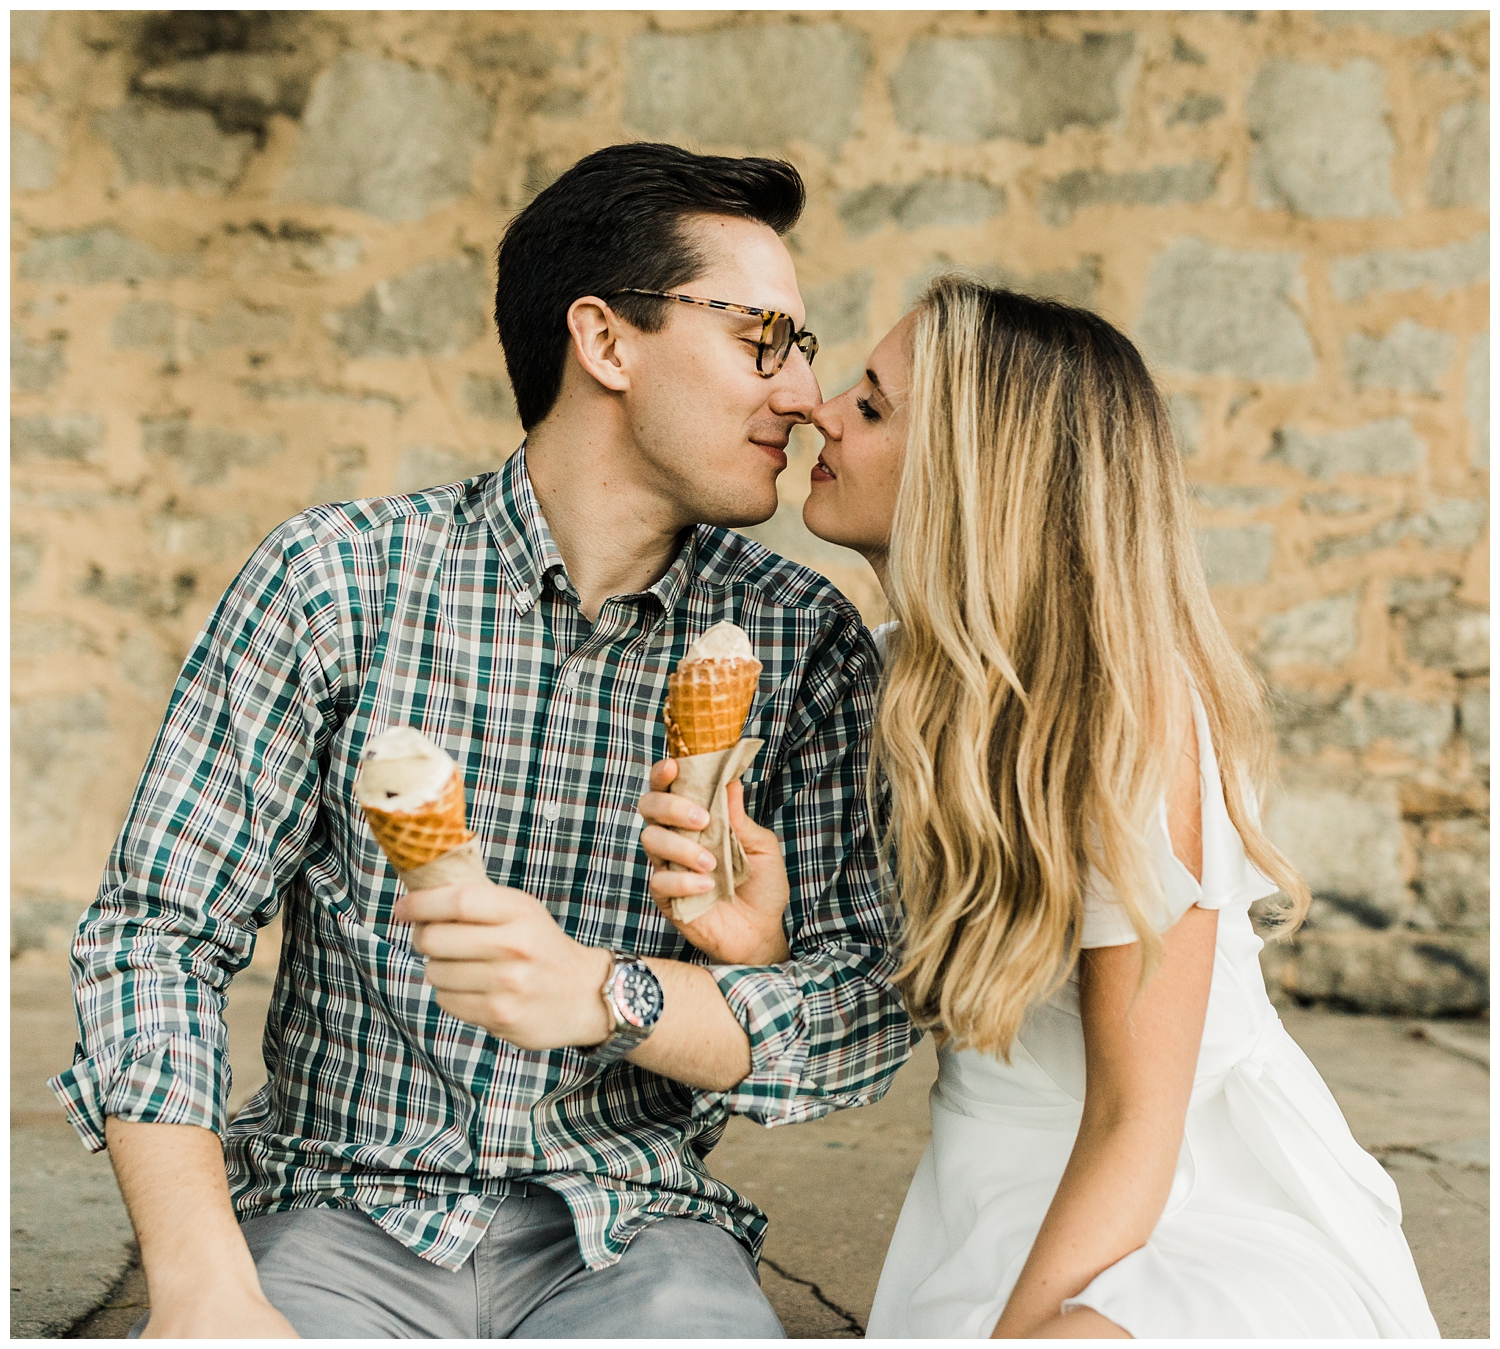 Atlanta, Georgia engagement session of a young couple kissing and eating ice cream together on the Atlanta Beltline